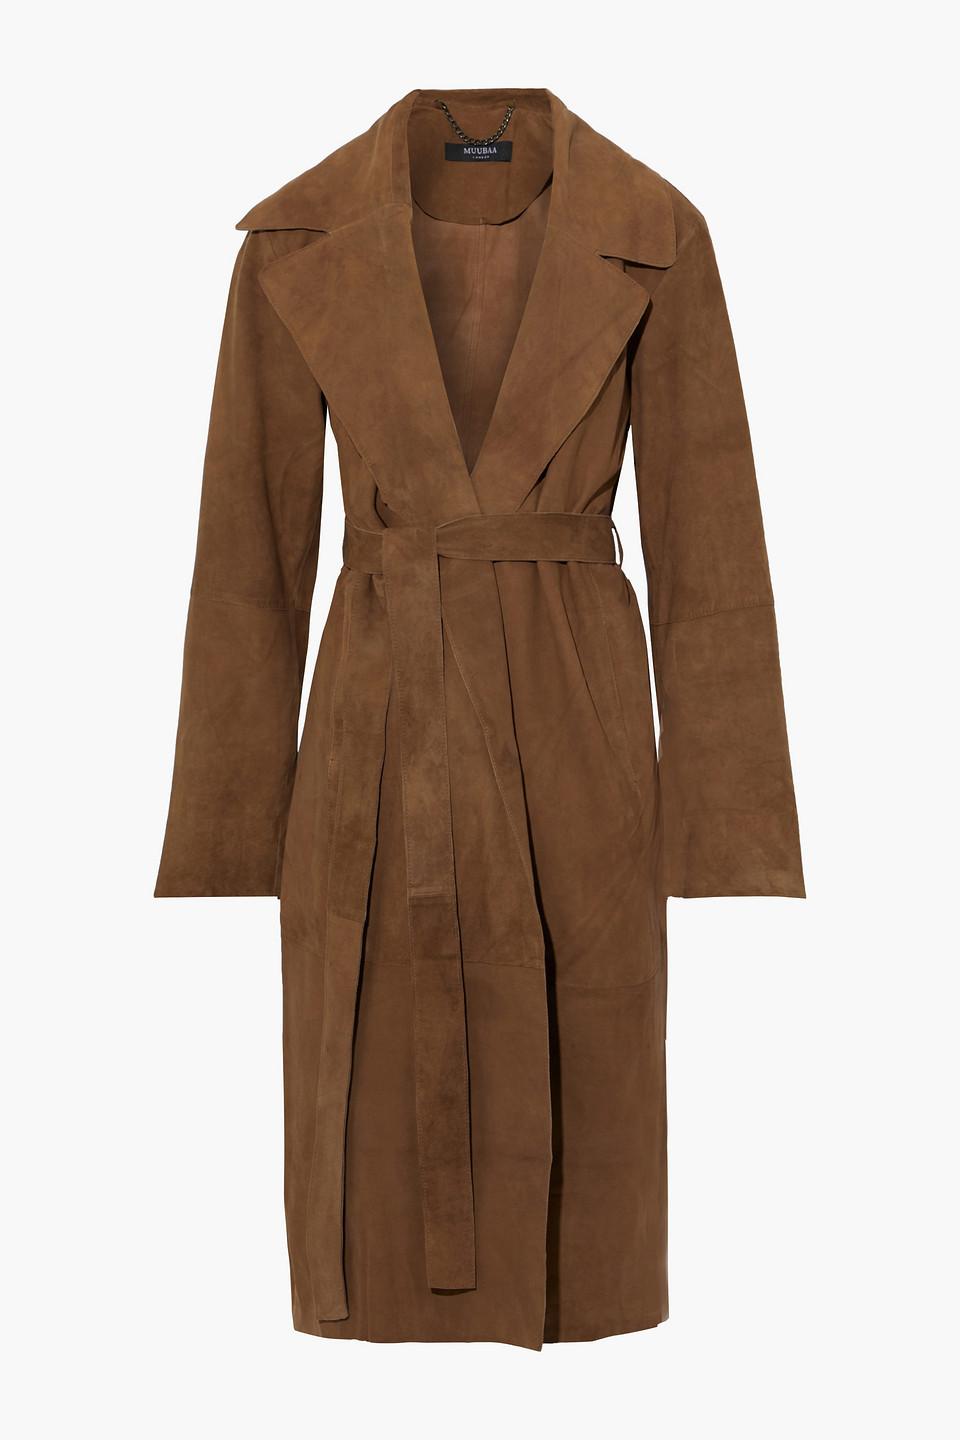 Muubaa Nora Belted Suede Trench Coat in Brown | Lyst